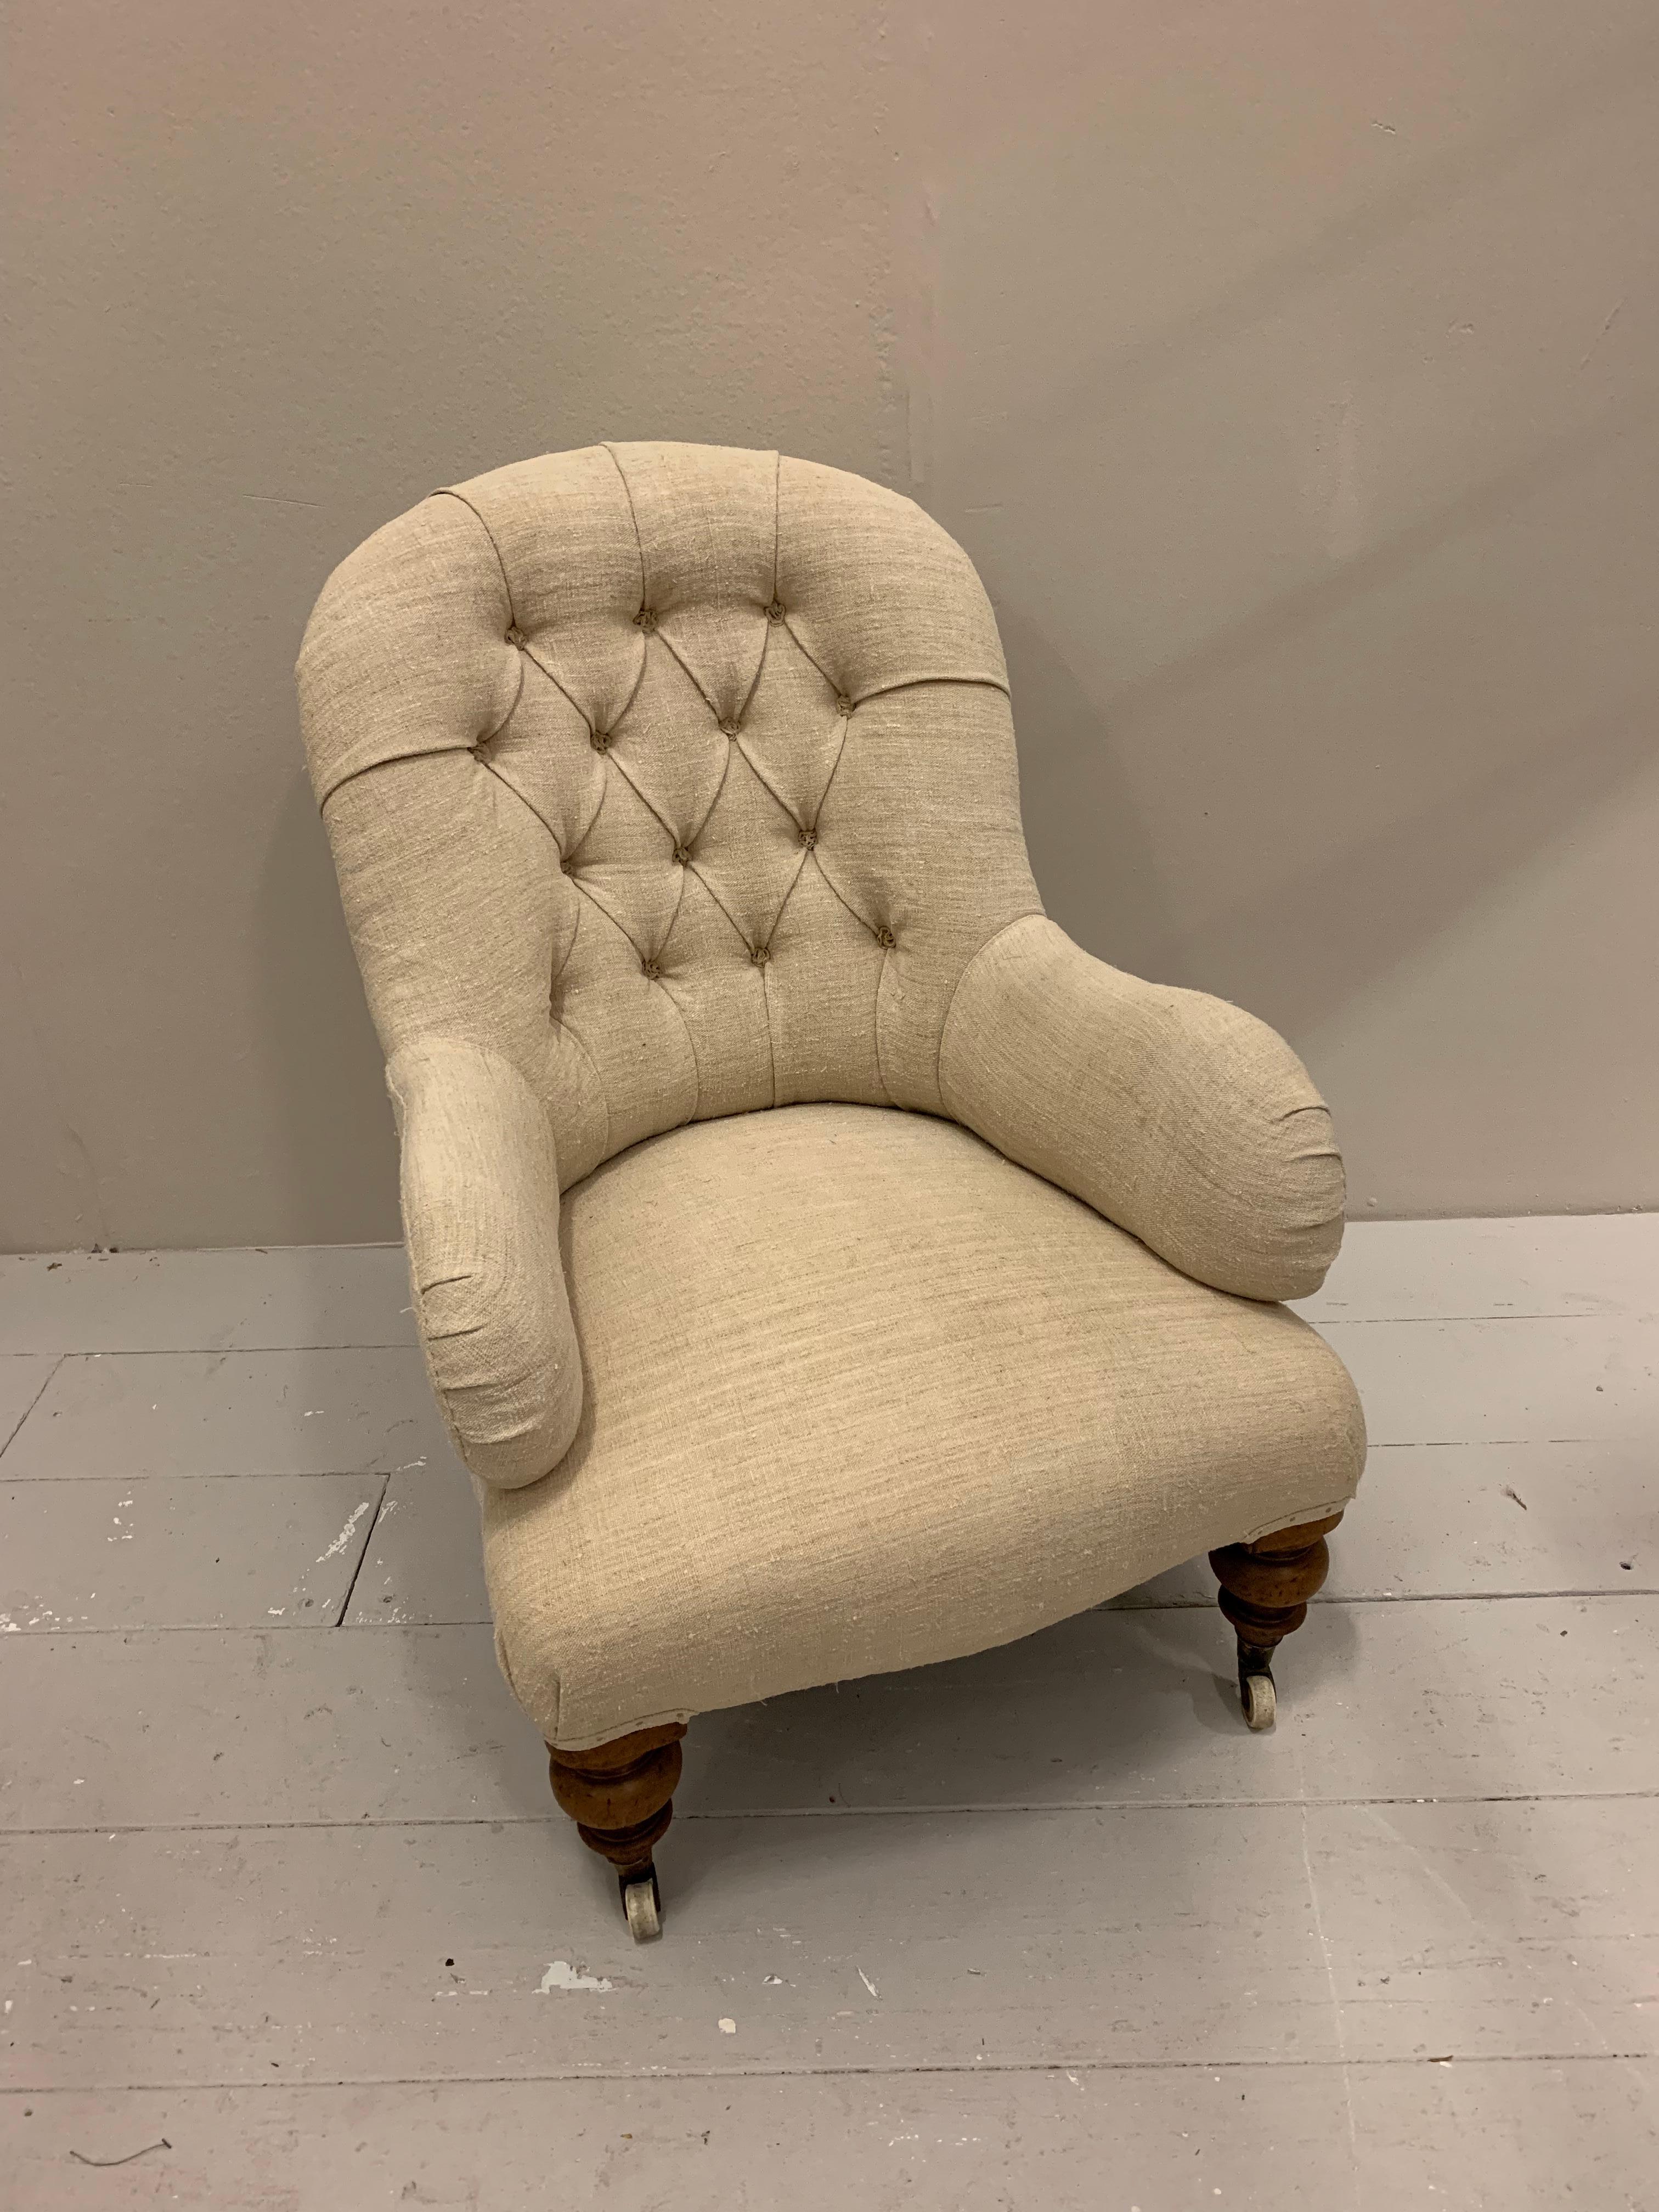 Circa 19th century upholstered English armchair with turned legs and ceramic castors.
This understated buttoned back armchair has been upholstered in a slightly coarse off white vintage french linen.
Great as a fireside, bedroom or reading chair,